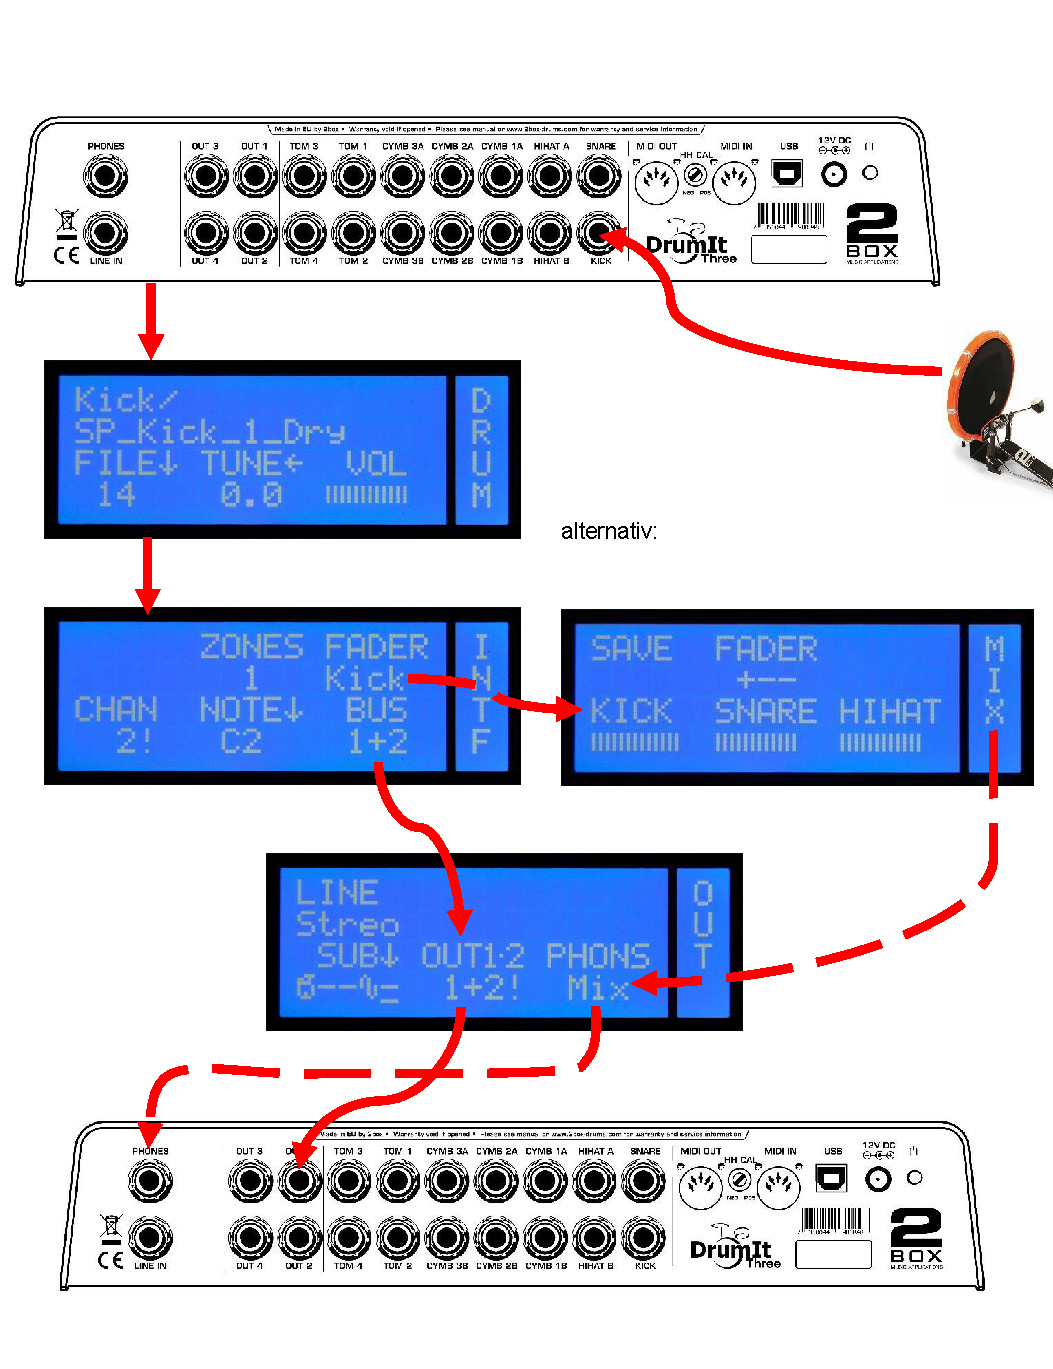 Photo-view-of-signal-flow-and-routing-options-2Box-drumIt-Three